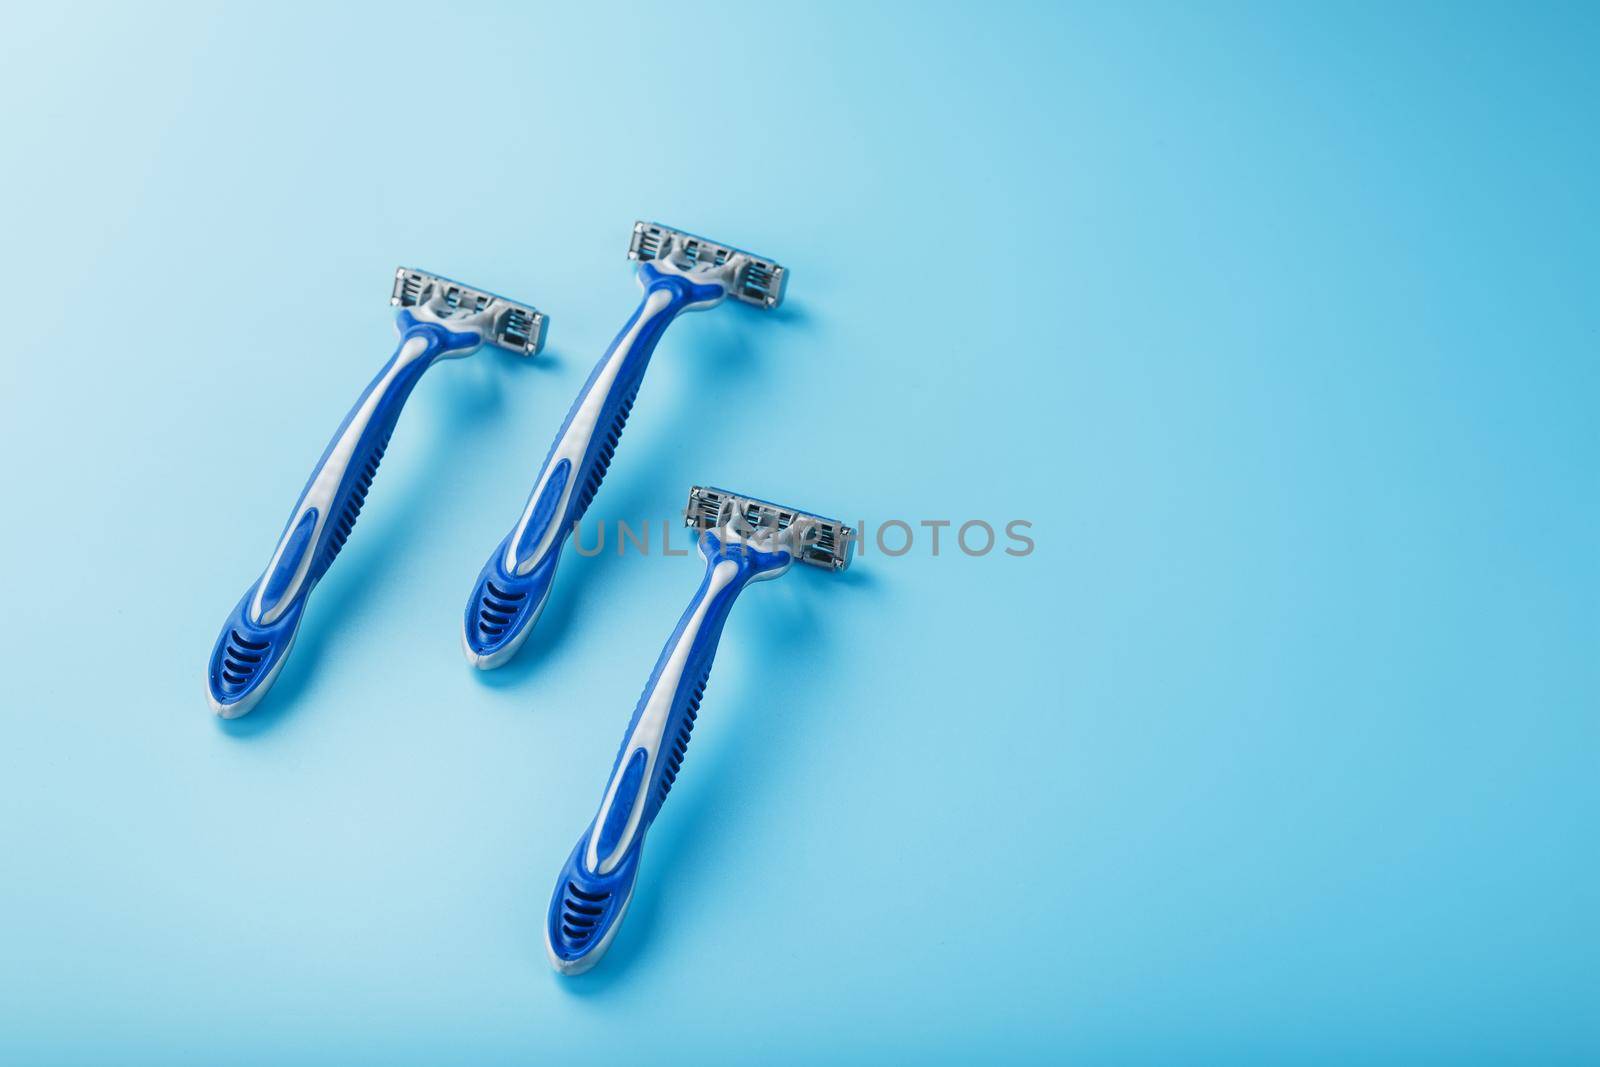 Blue shaving machines in a row on a blue background with ice cubes by AlexGrec